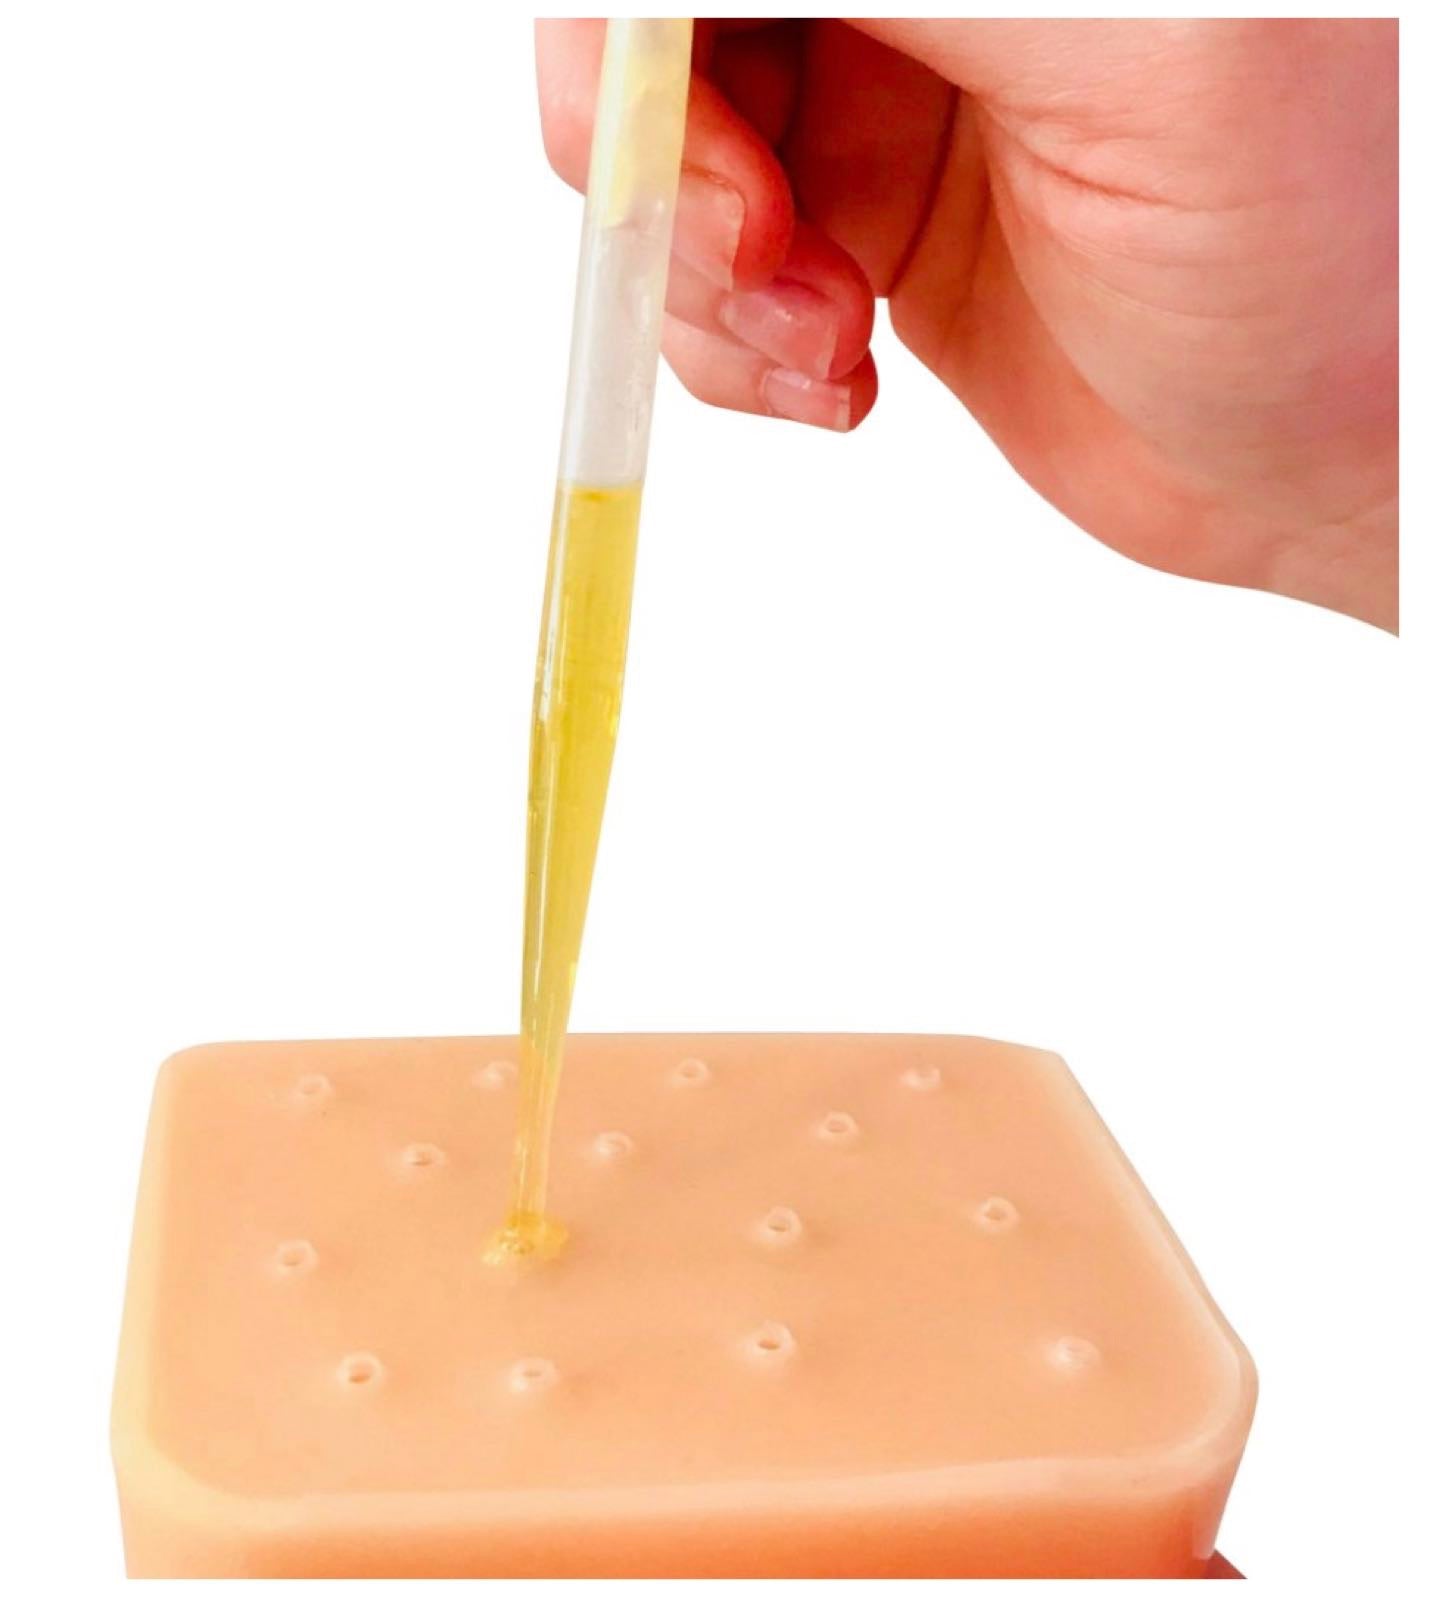 PIMPLE POP- Perfect Toy For Both Kids And Adults